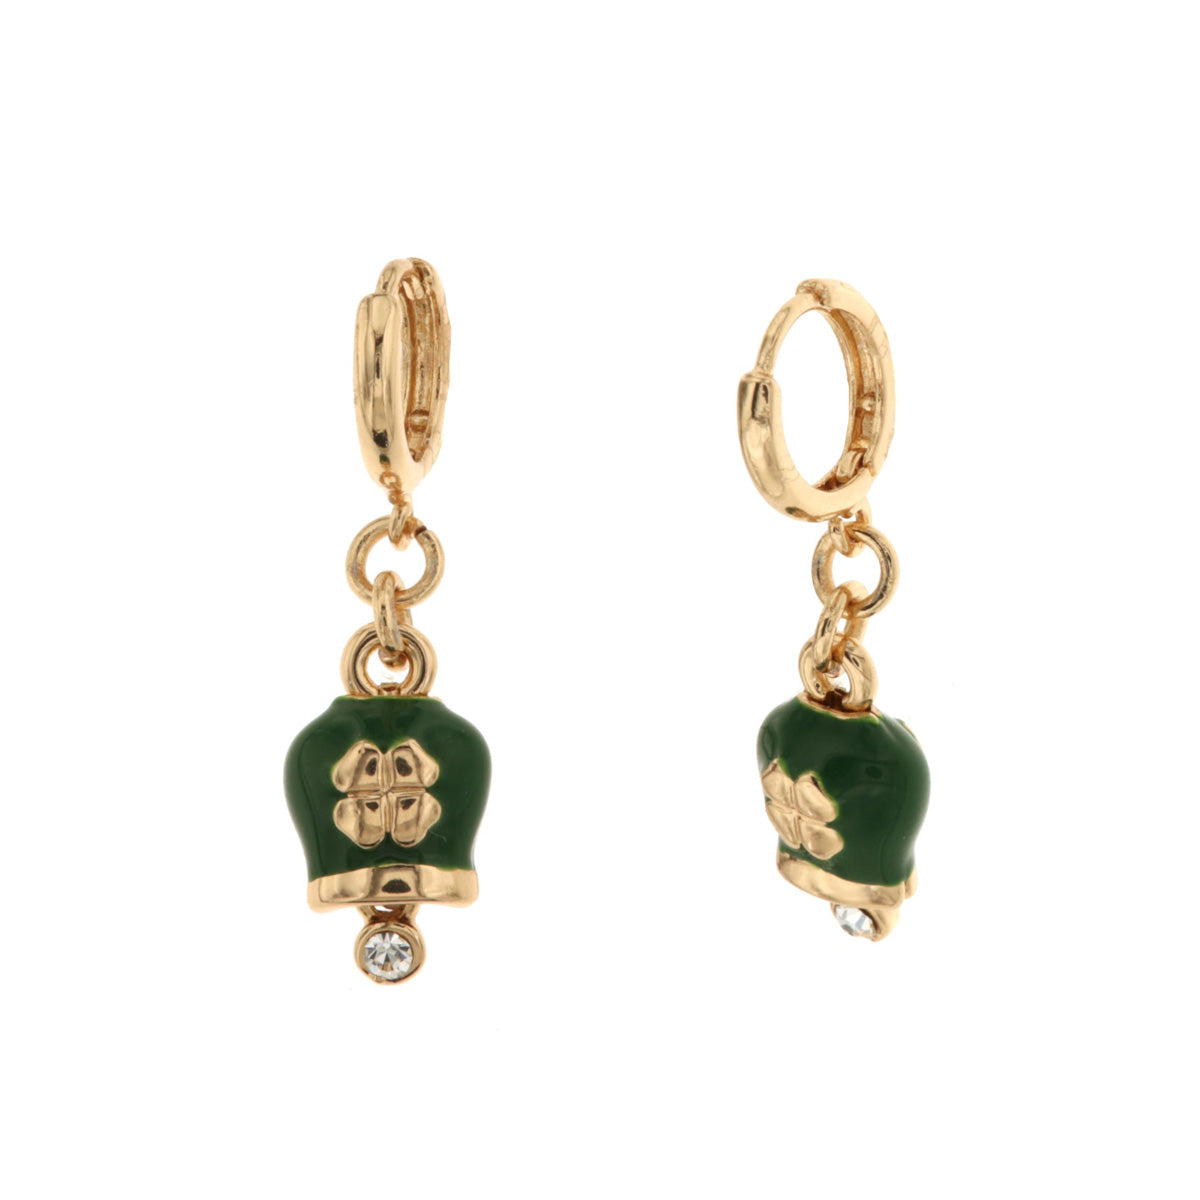 Circle metal earrings with green charms bell with pendant four -leaf clover